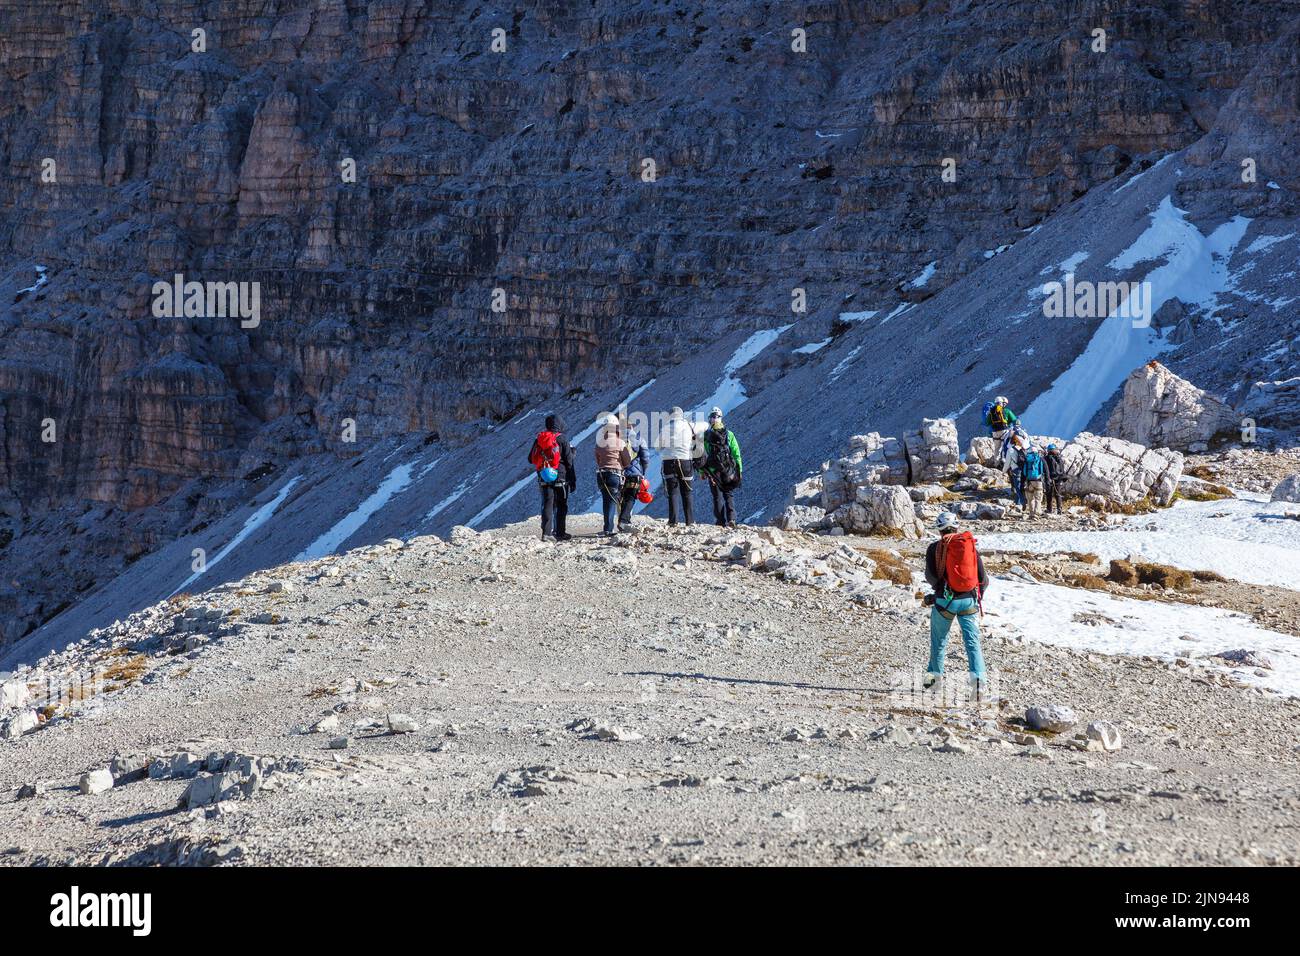 Hikers in the Dolomites mountains Stock Photo